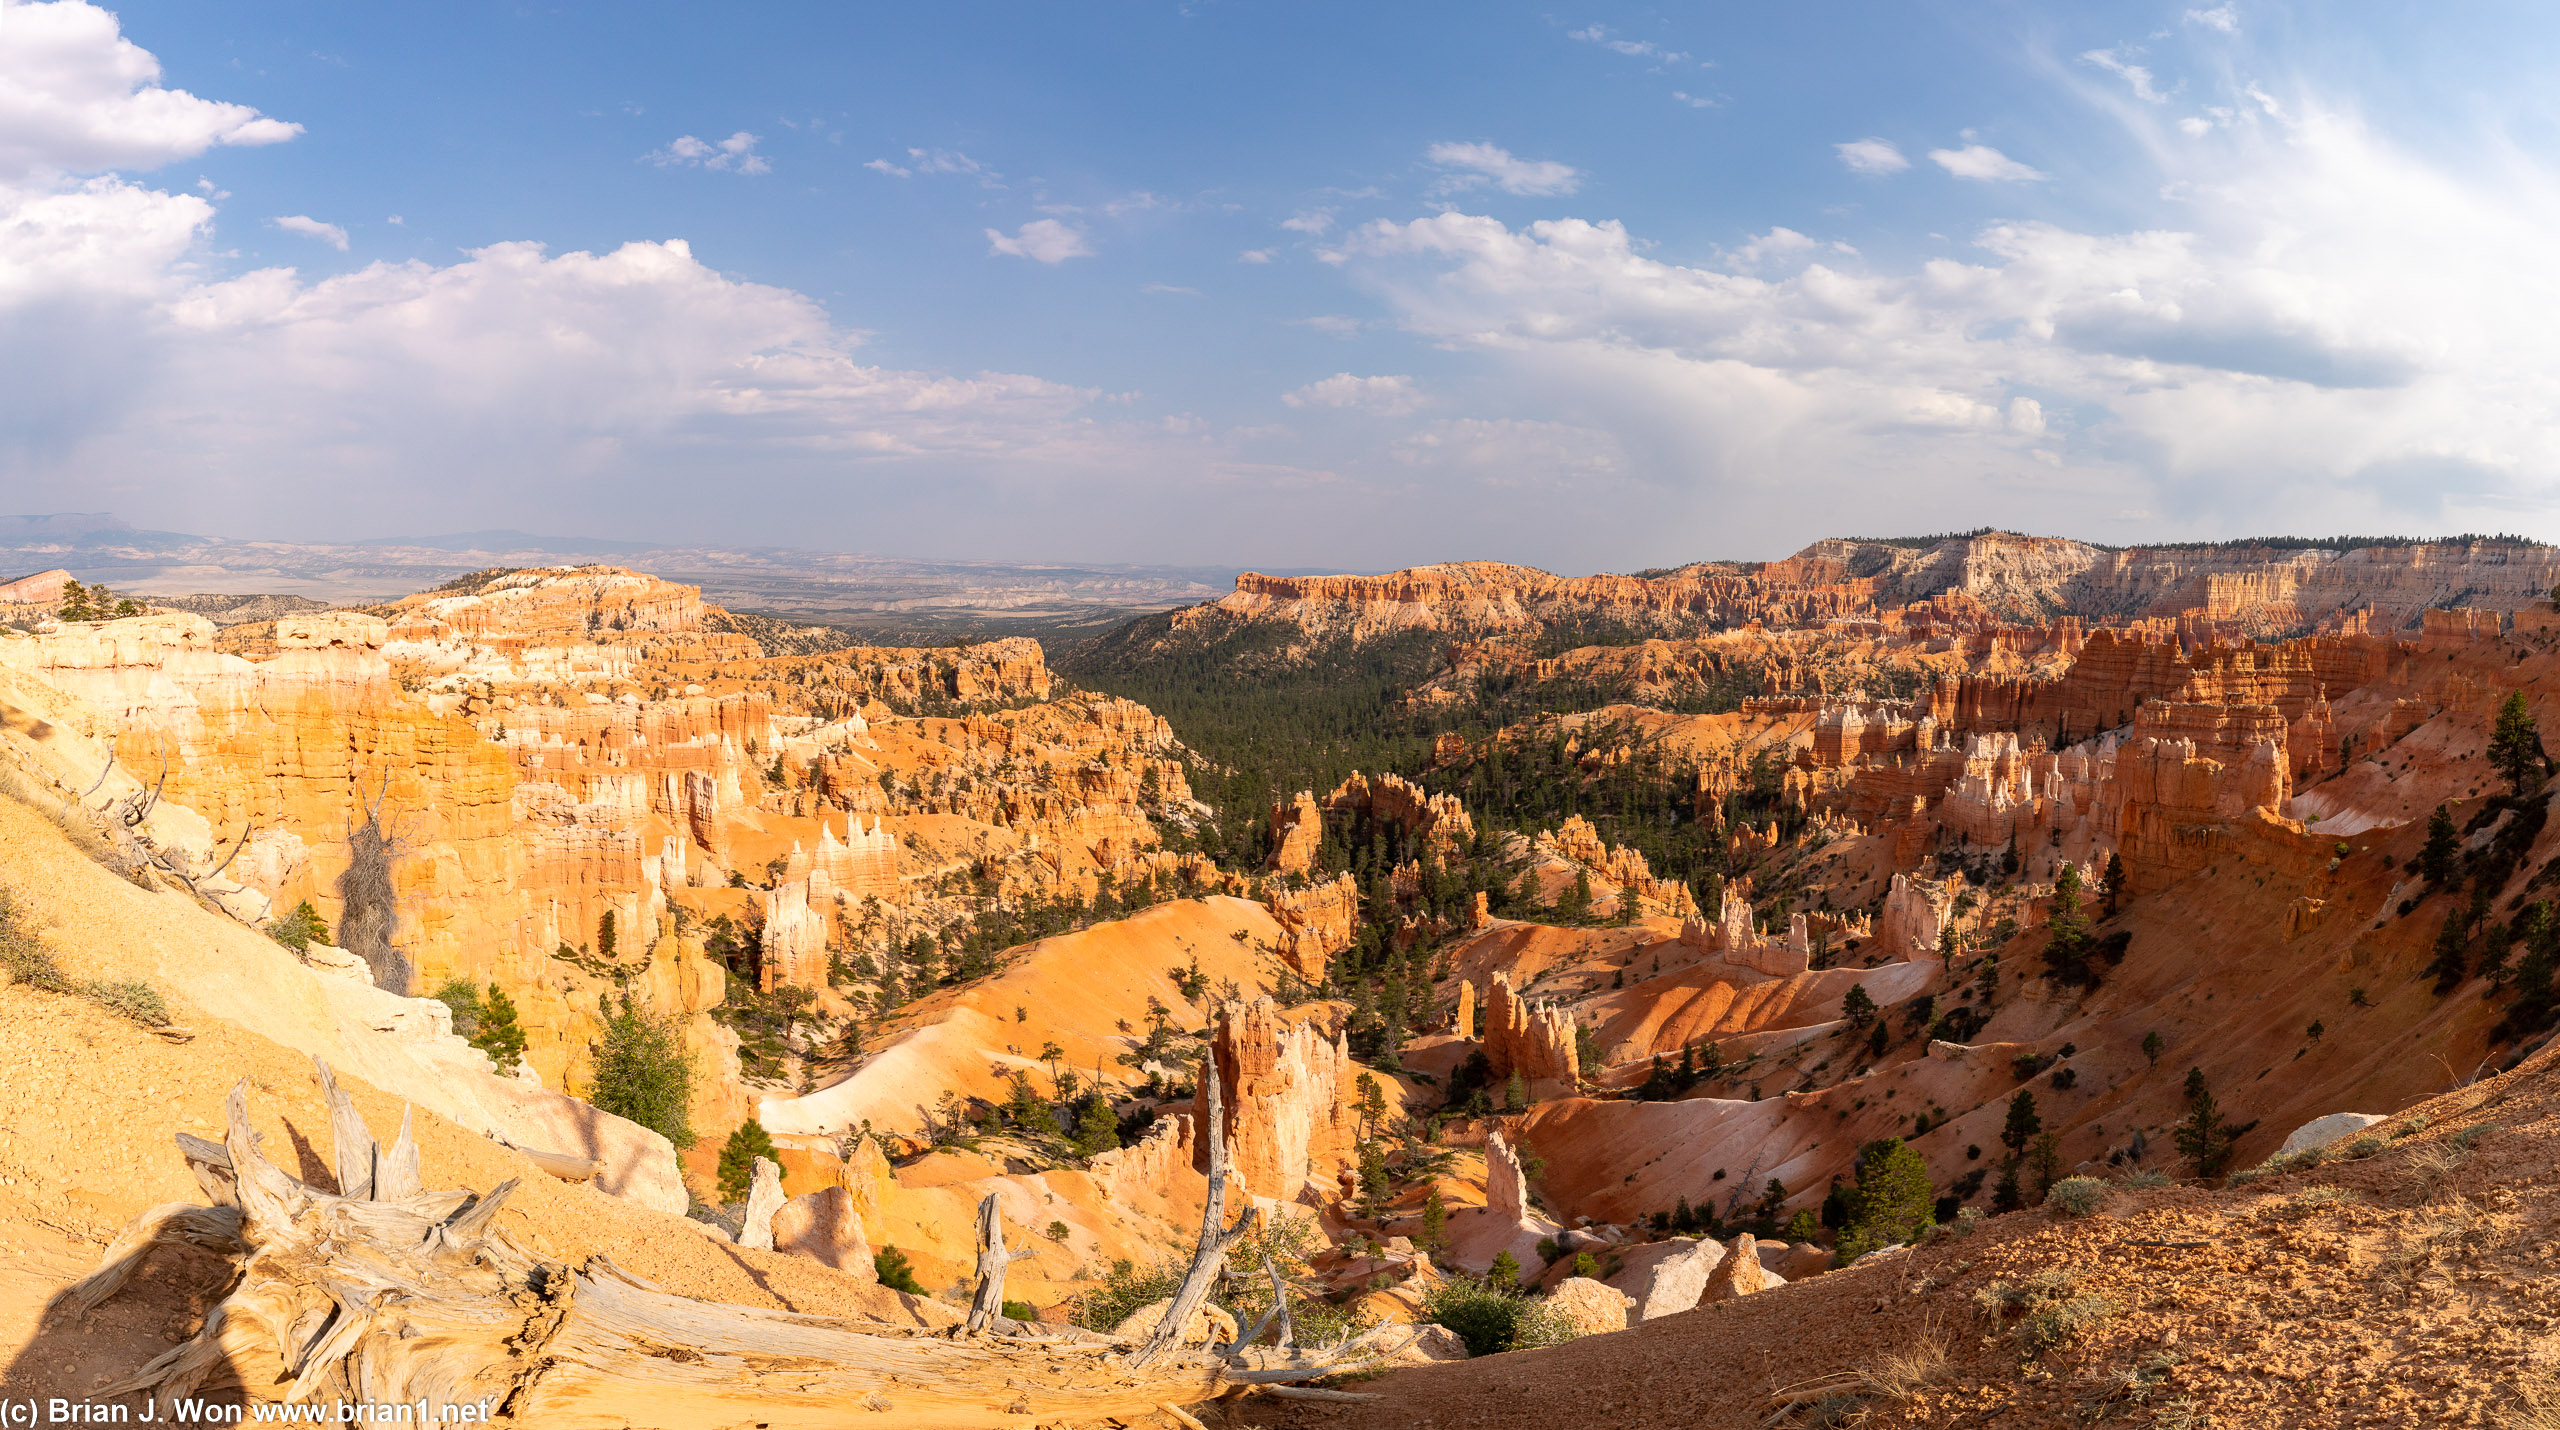 As spectacular as Bryce Canyon is, when the sun is shining, it is truly amazing.